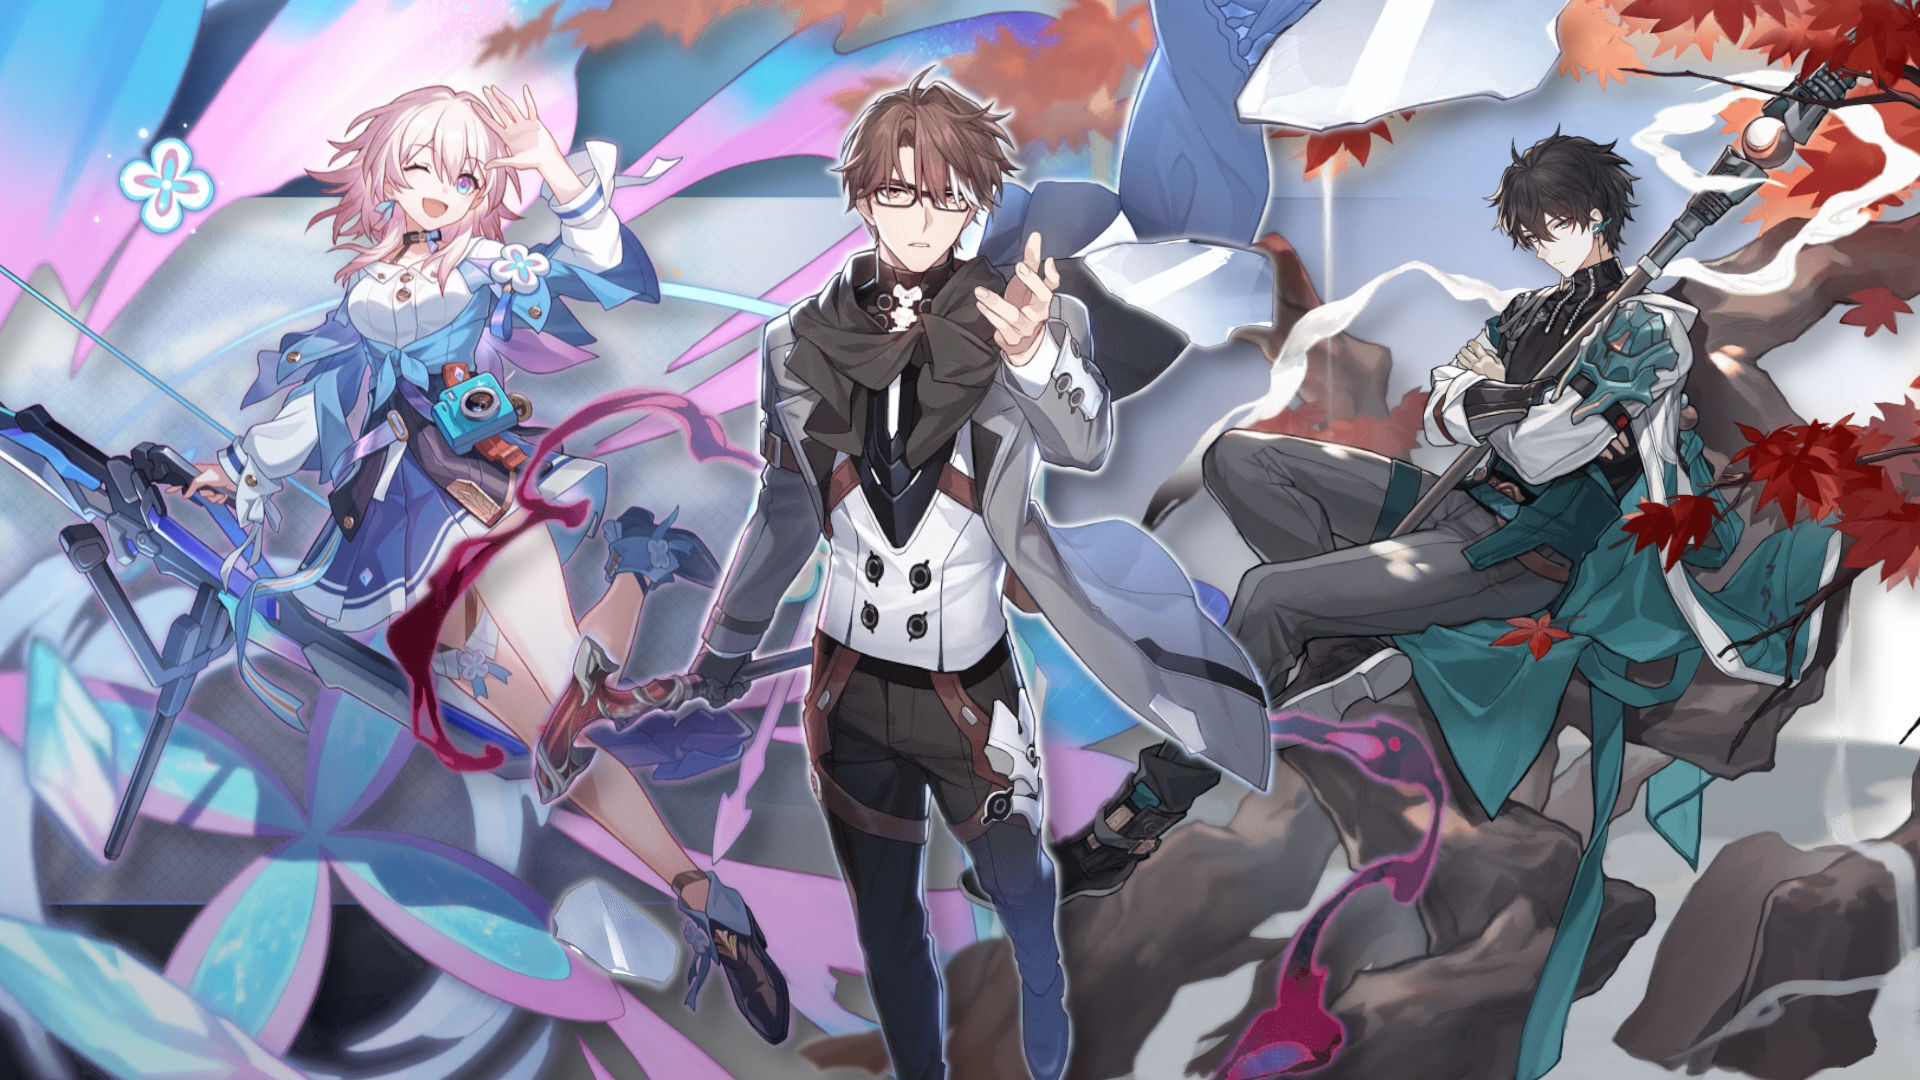 Honkai Star Rail characters – voice actors, backgrounds, and more